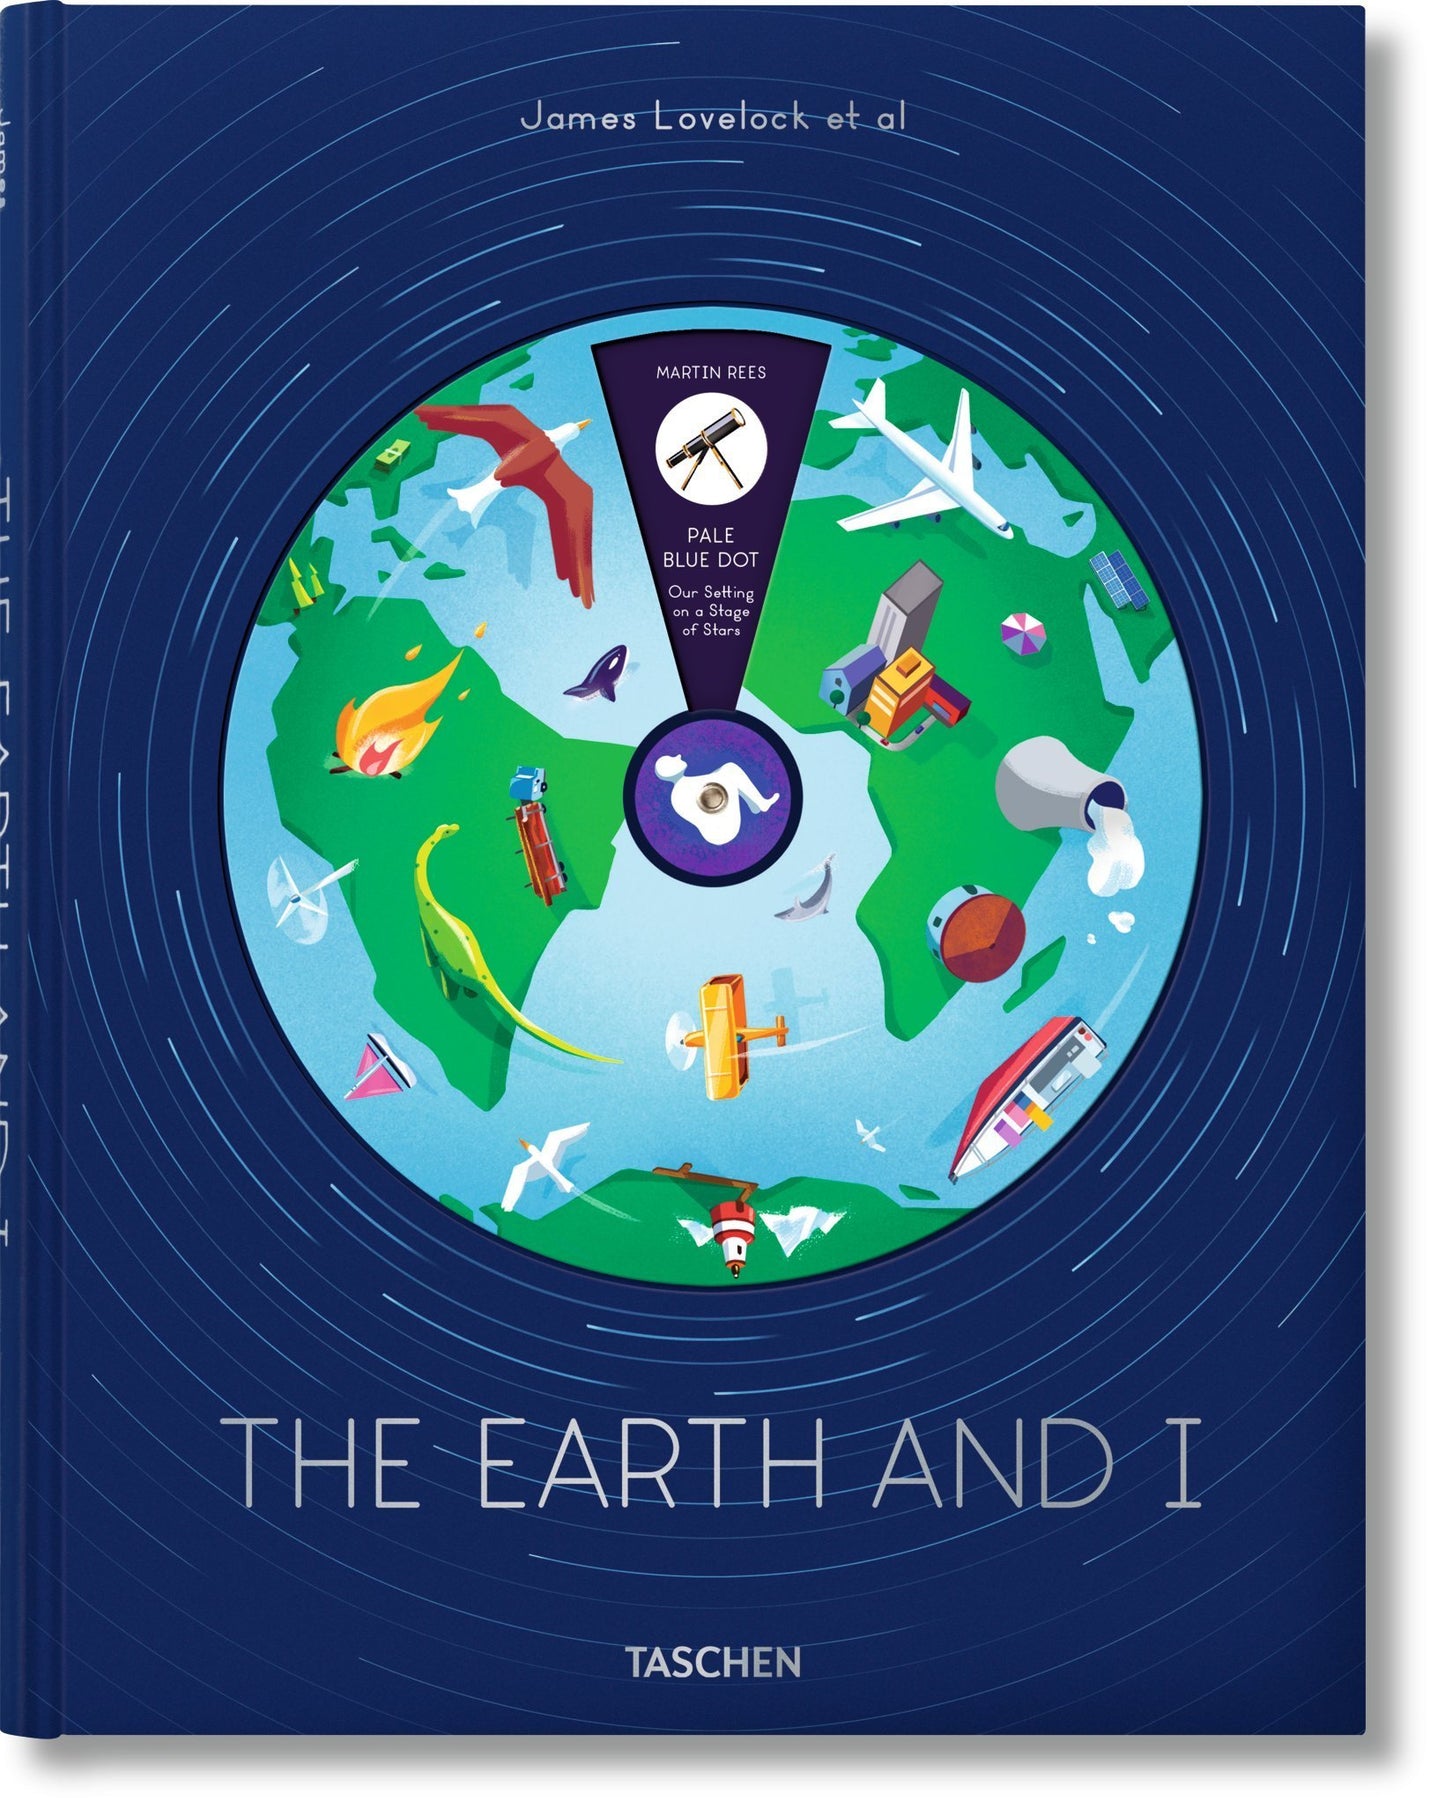 The Earth and I by James Lovelock